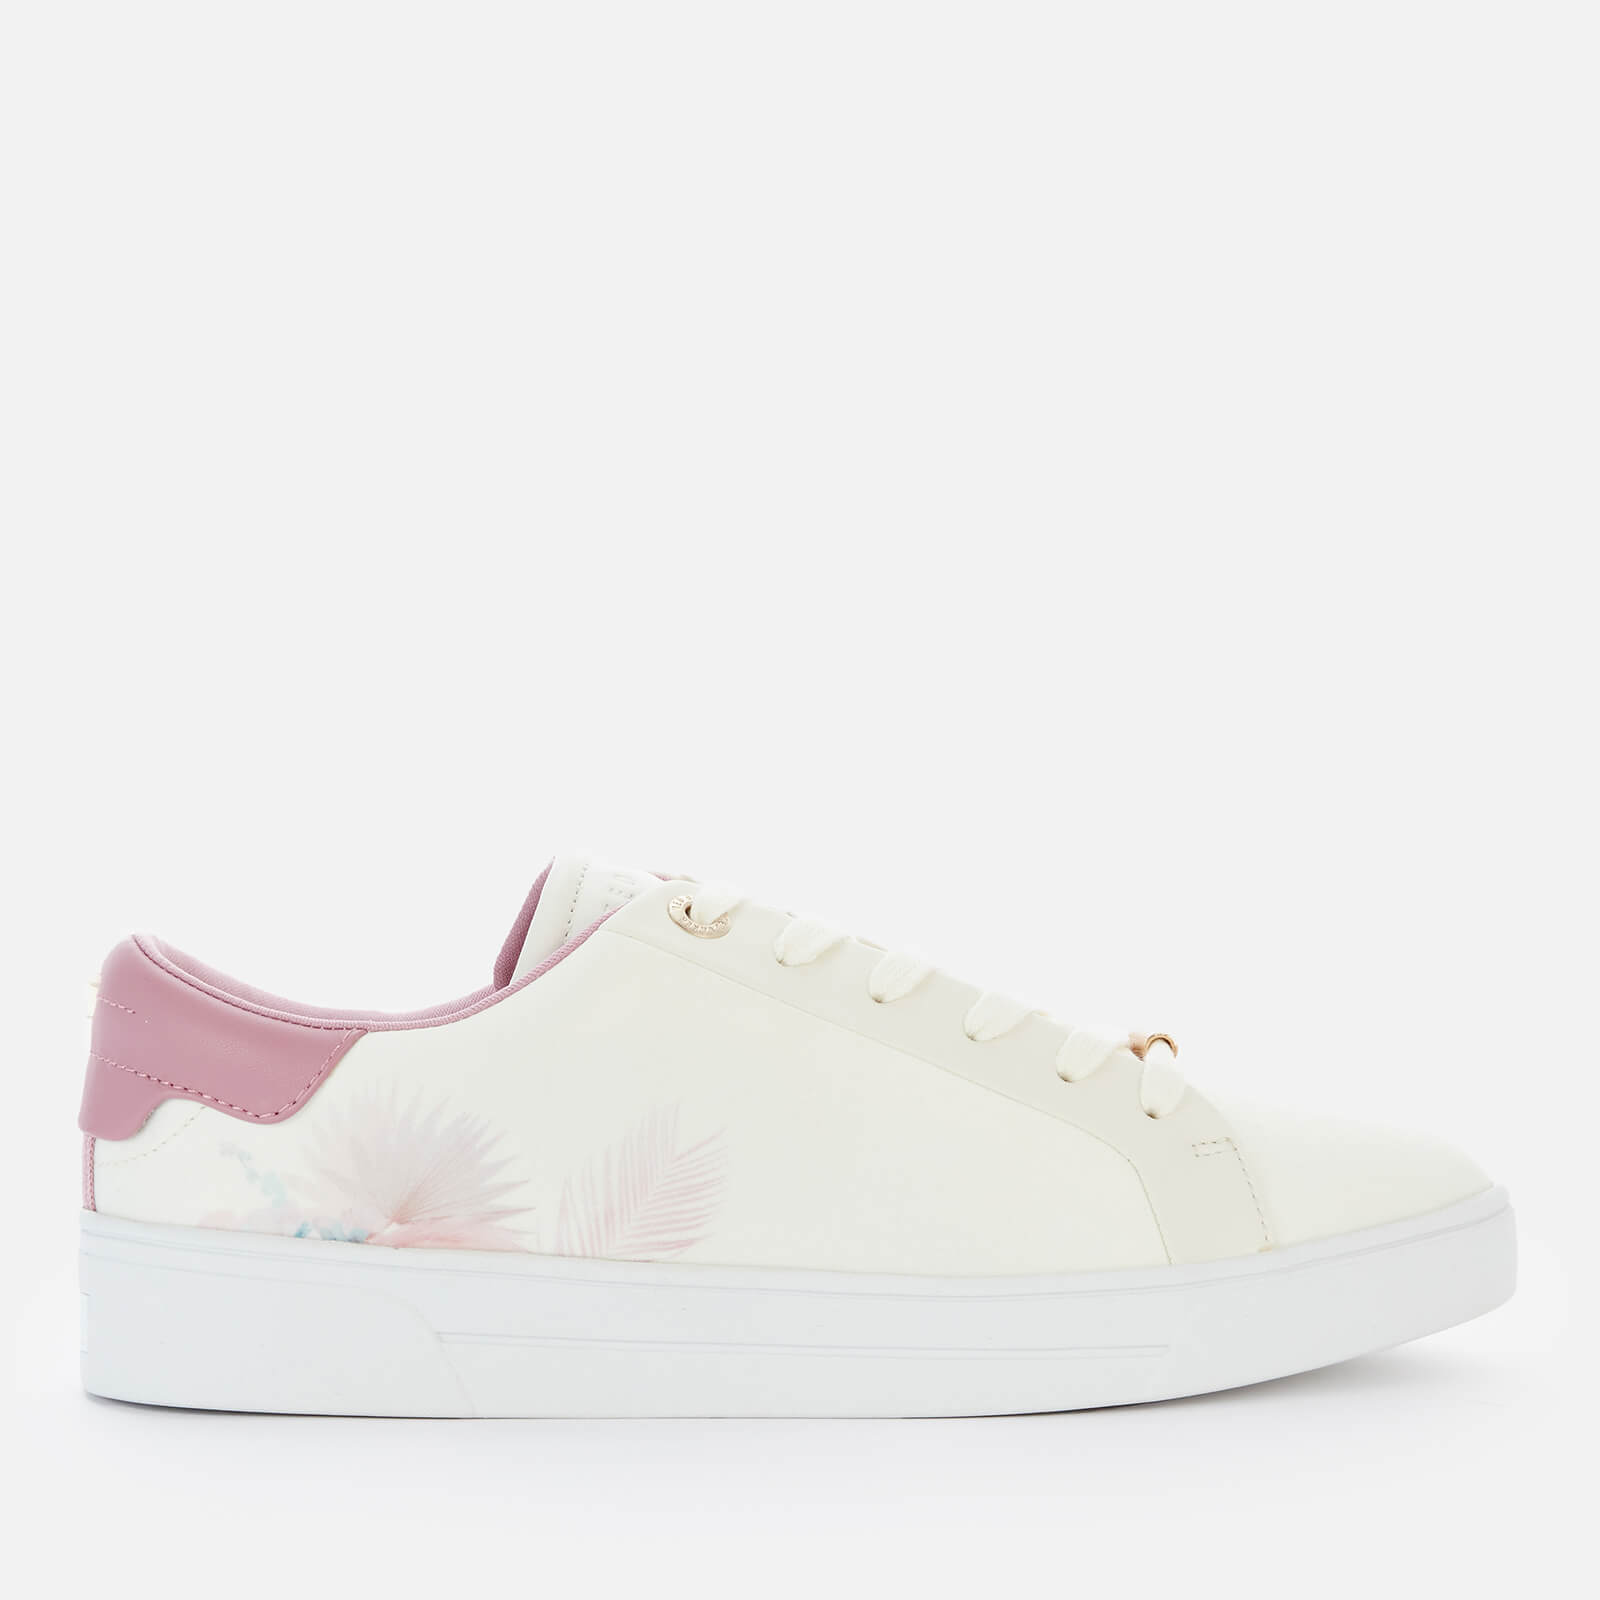 Ted Baker Women's Delylas Cupsole Trainers - White - UK 3